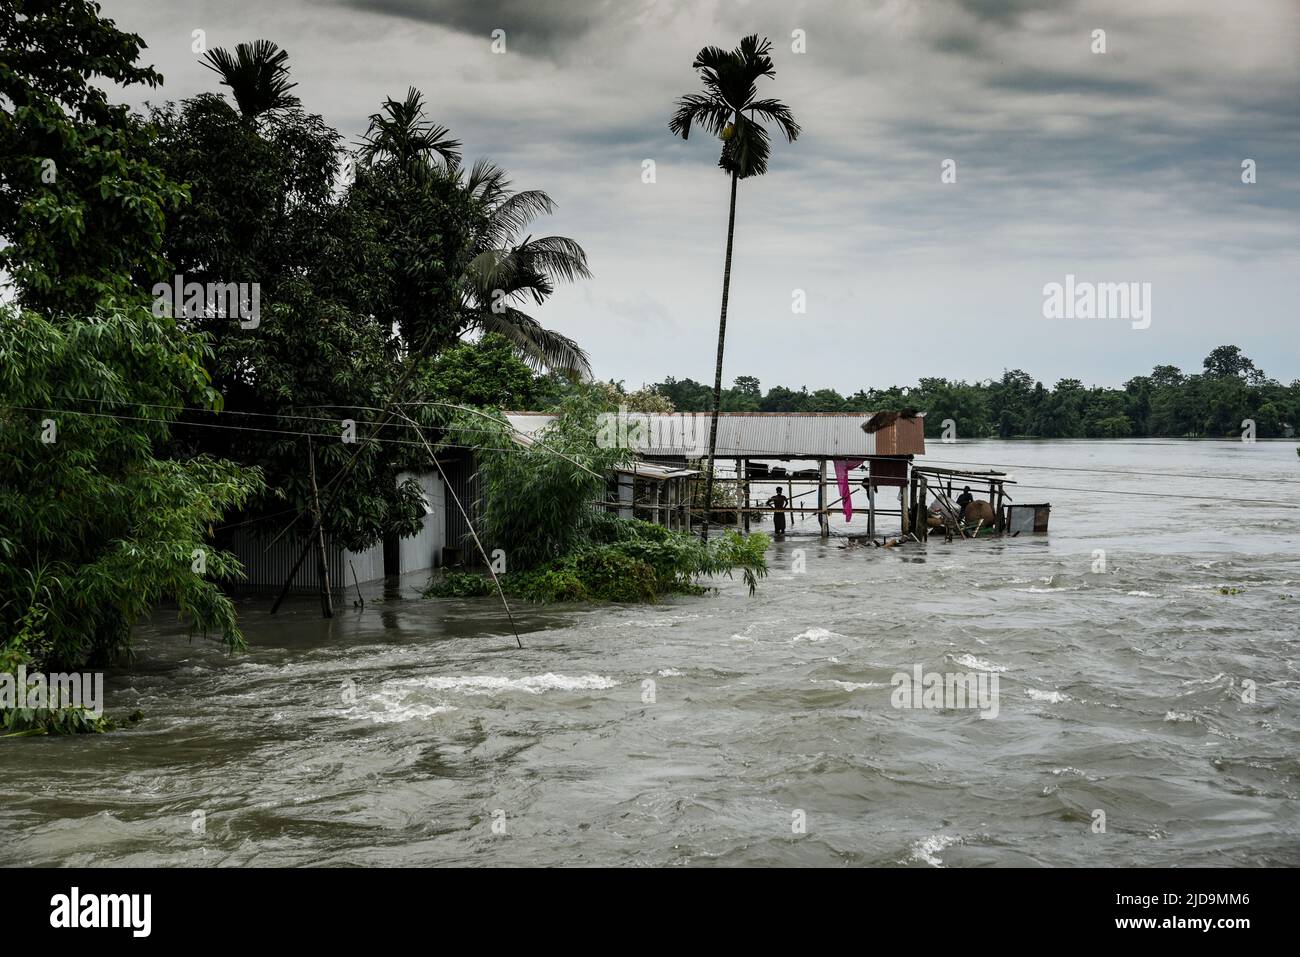 A damaged house due to flooding after heavy rainfall, at a village on June 17, 2022 in Barpeta, India. Assam flood situation deteriorates due to heavy rain, over a million people affected. Stock Photo